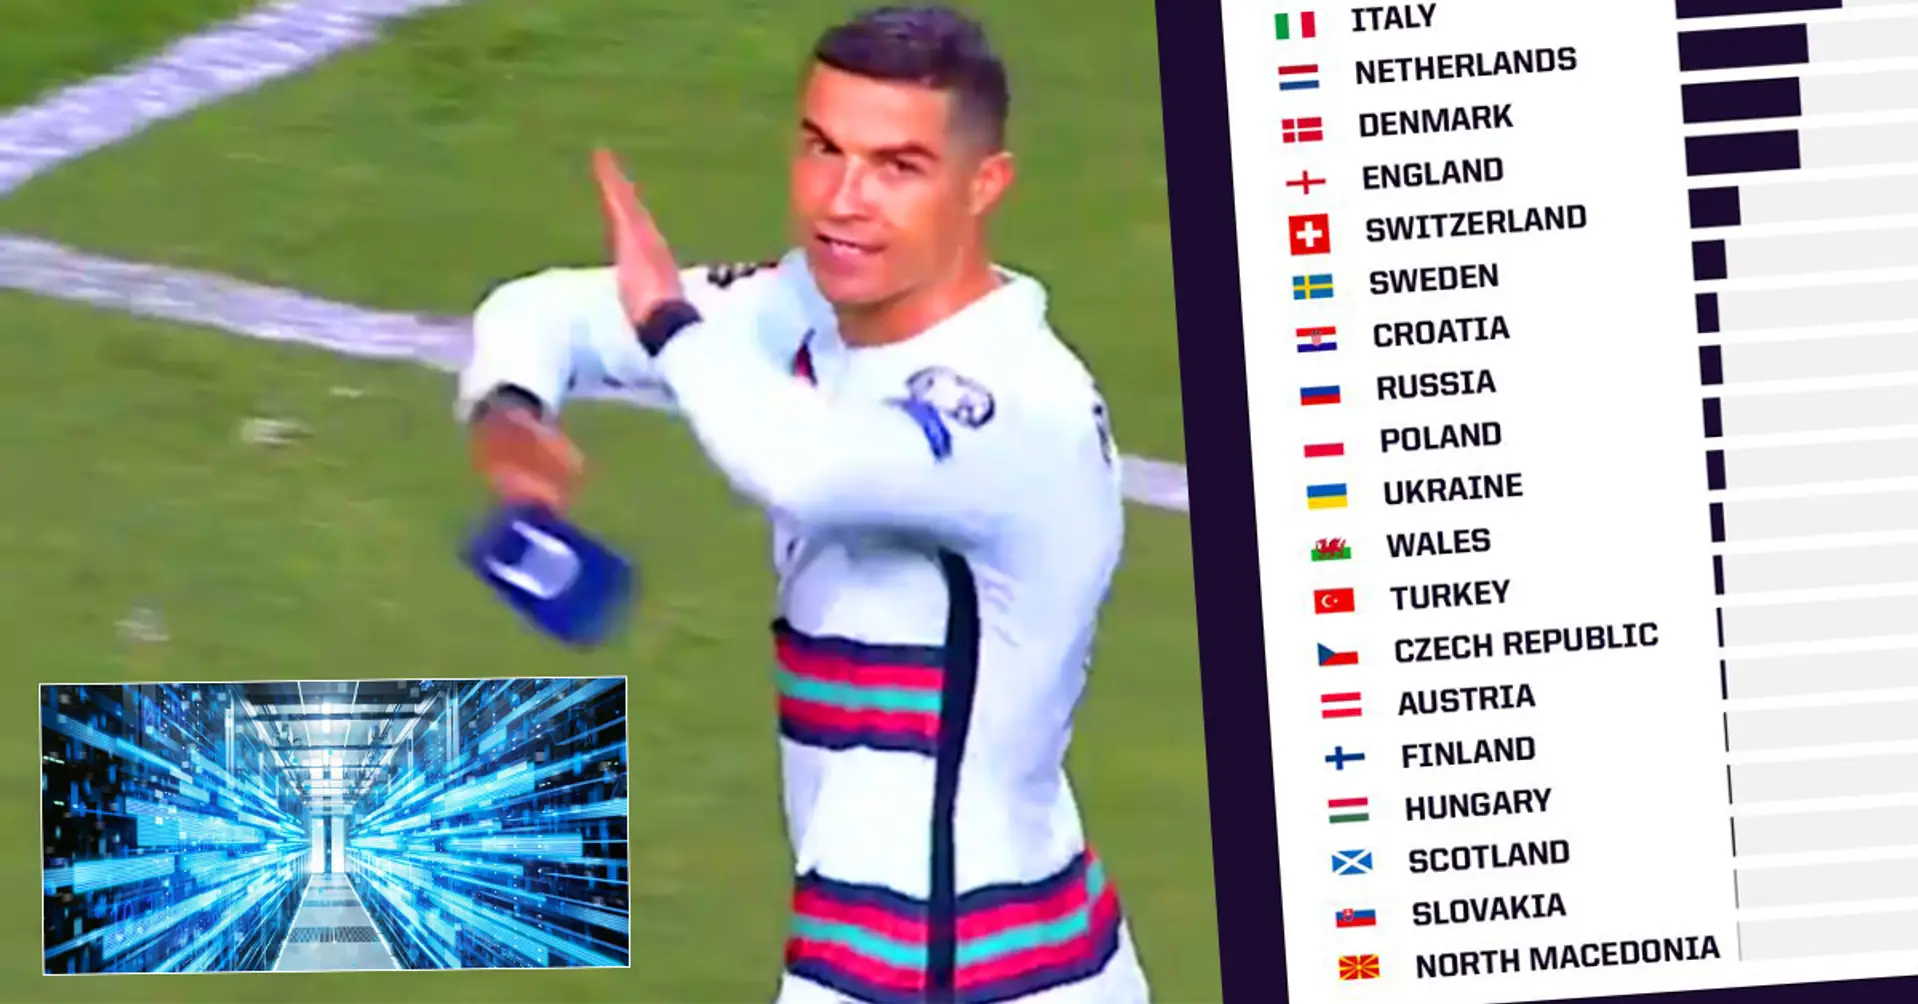 Supercomputer predicts semifinalists, finalists AND winner of Euro 2020